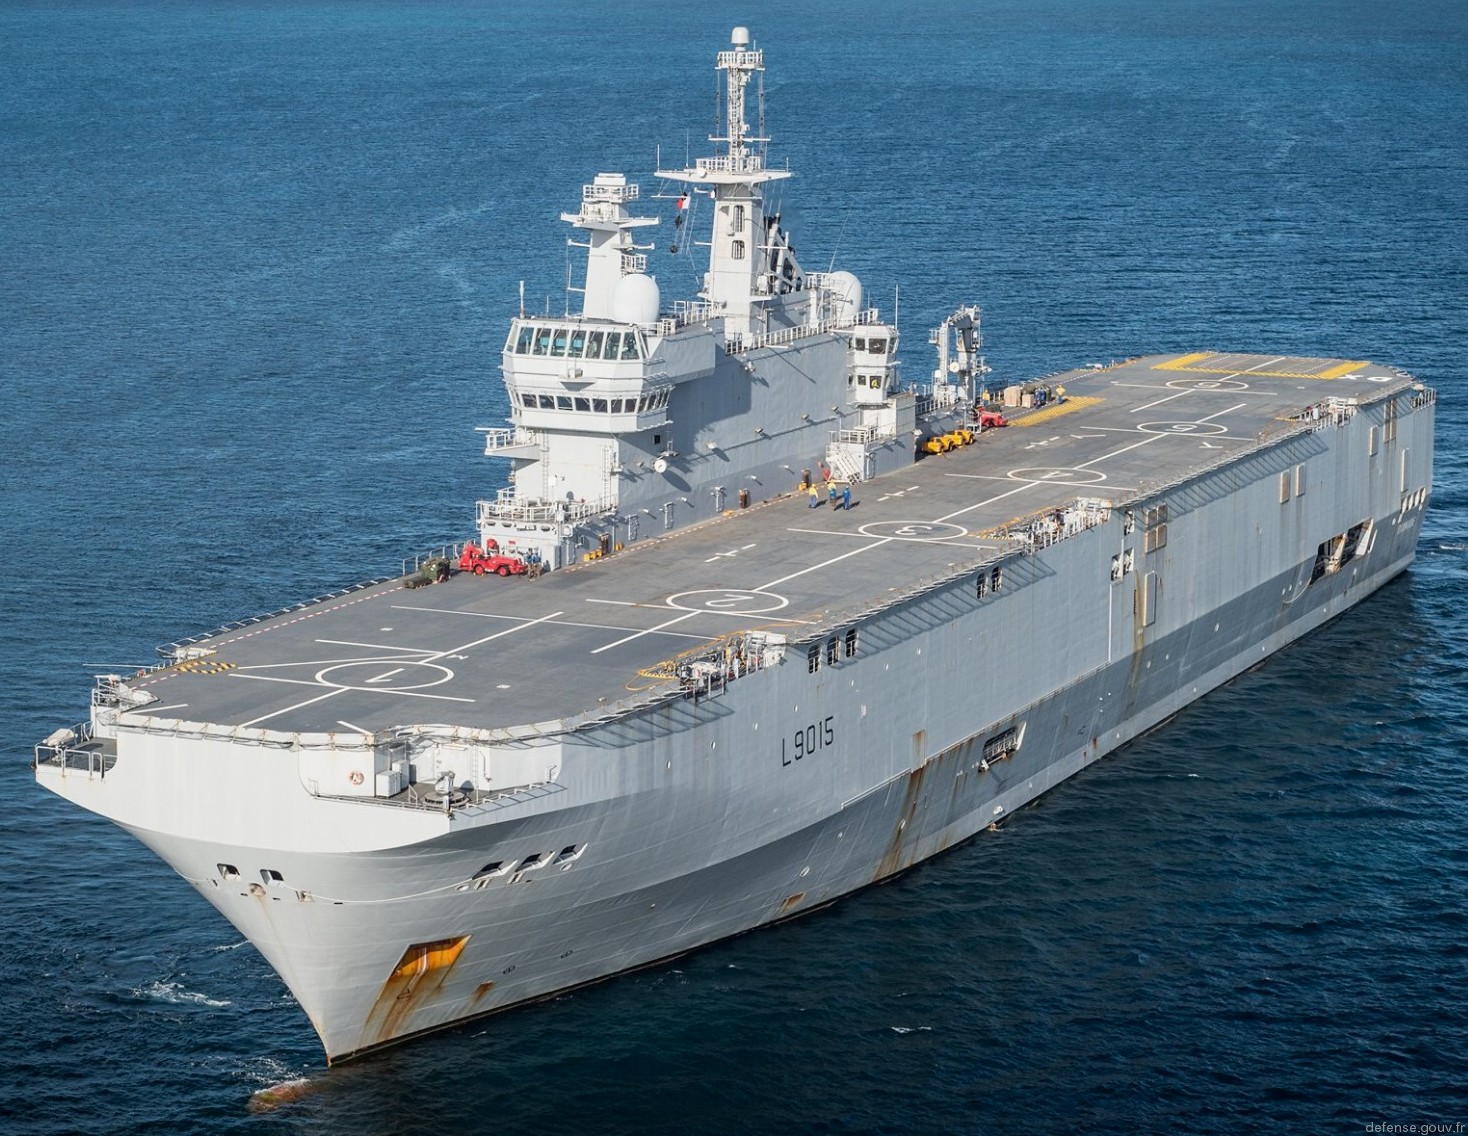 l-9015 fs dixmude mistral class amphibious assault command ship bpc french navy marine nationale 55